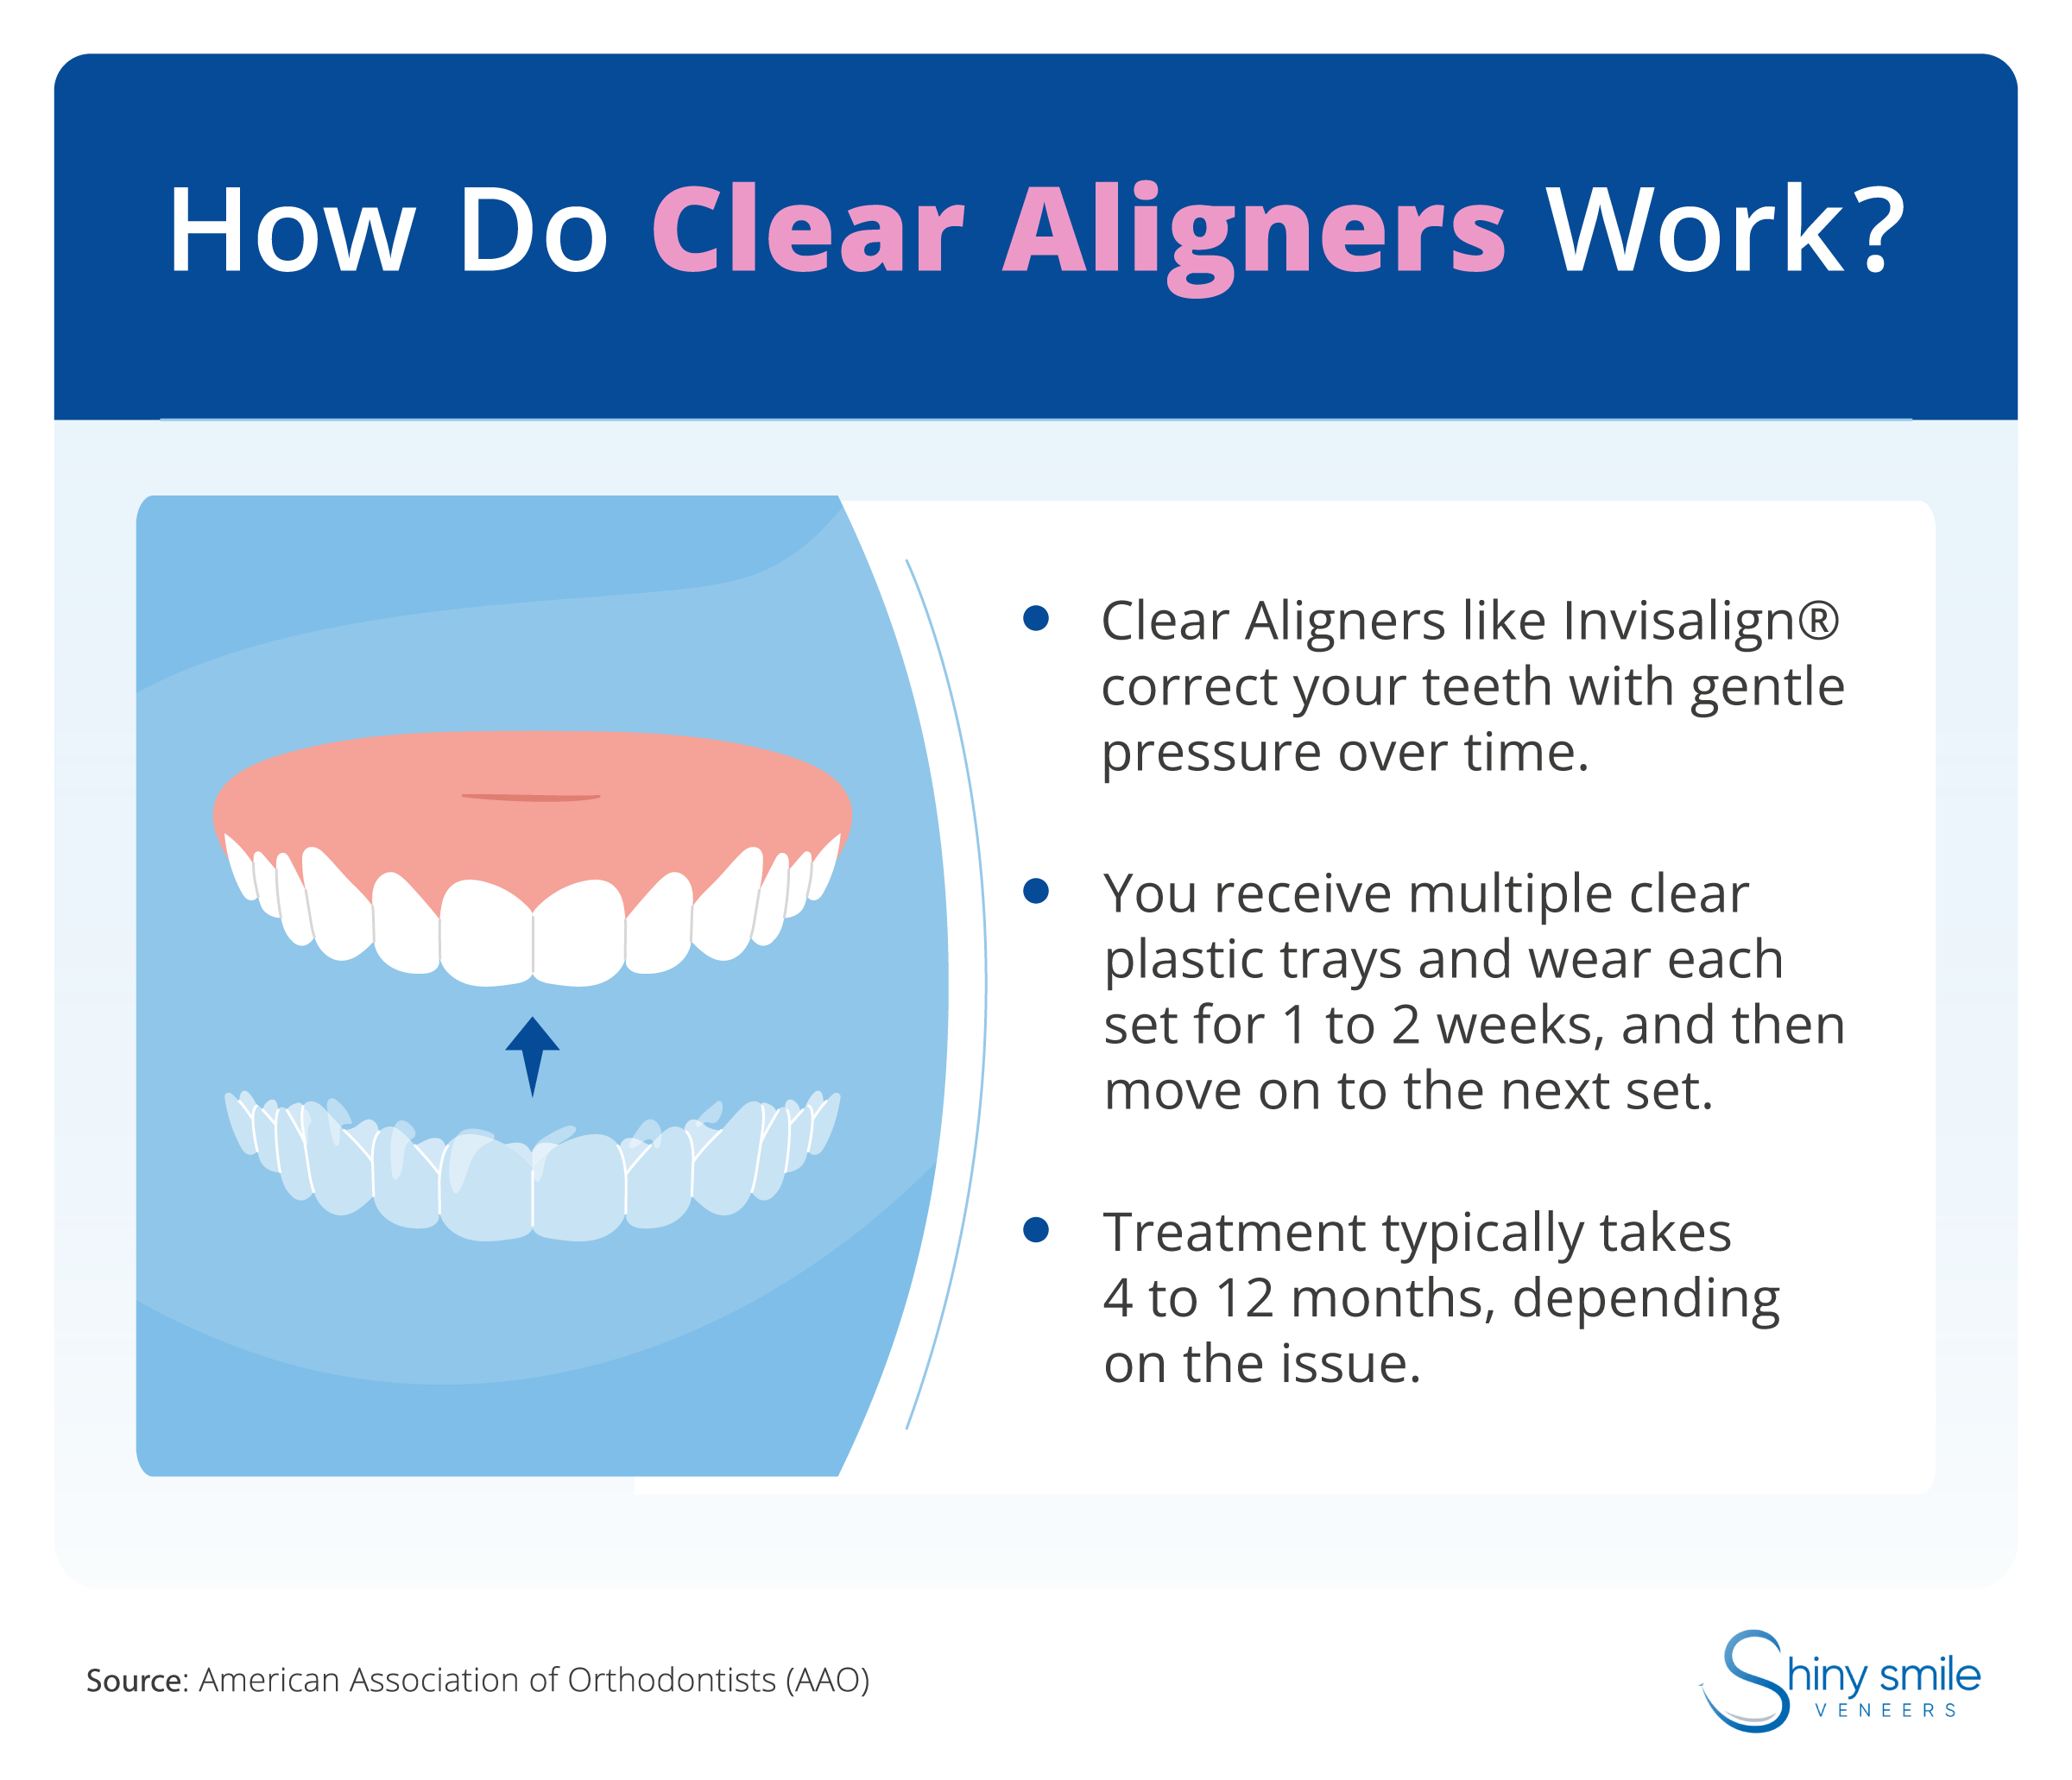 An explanation of how clear aligners work